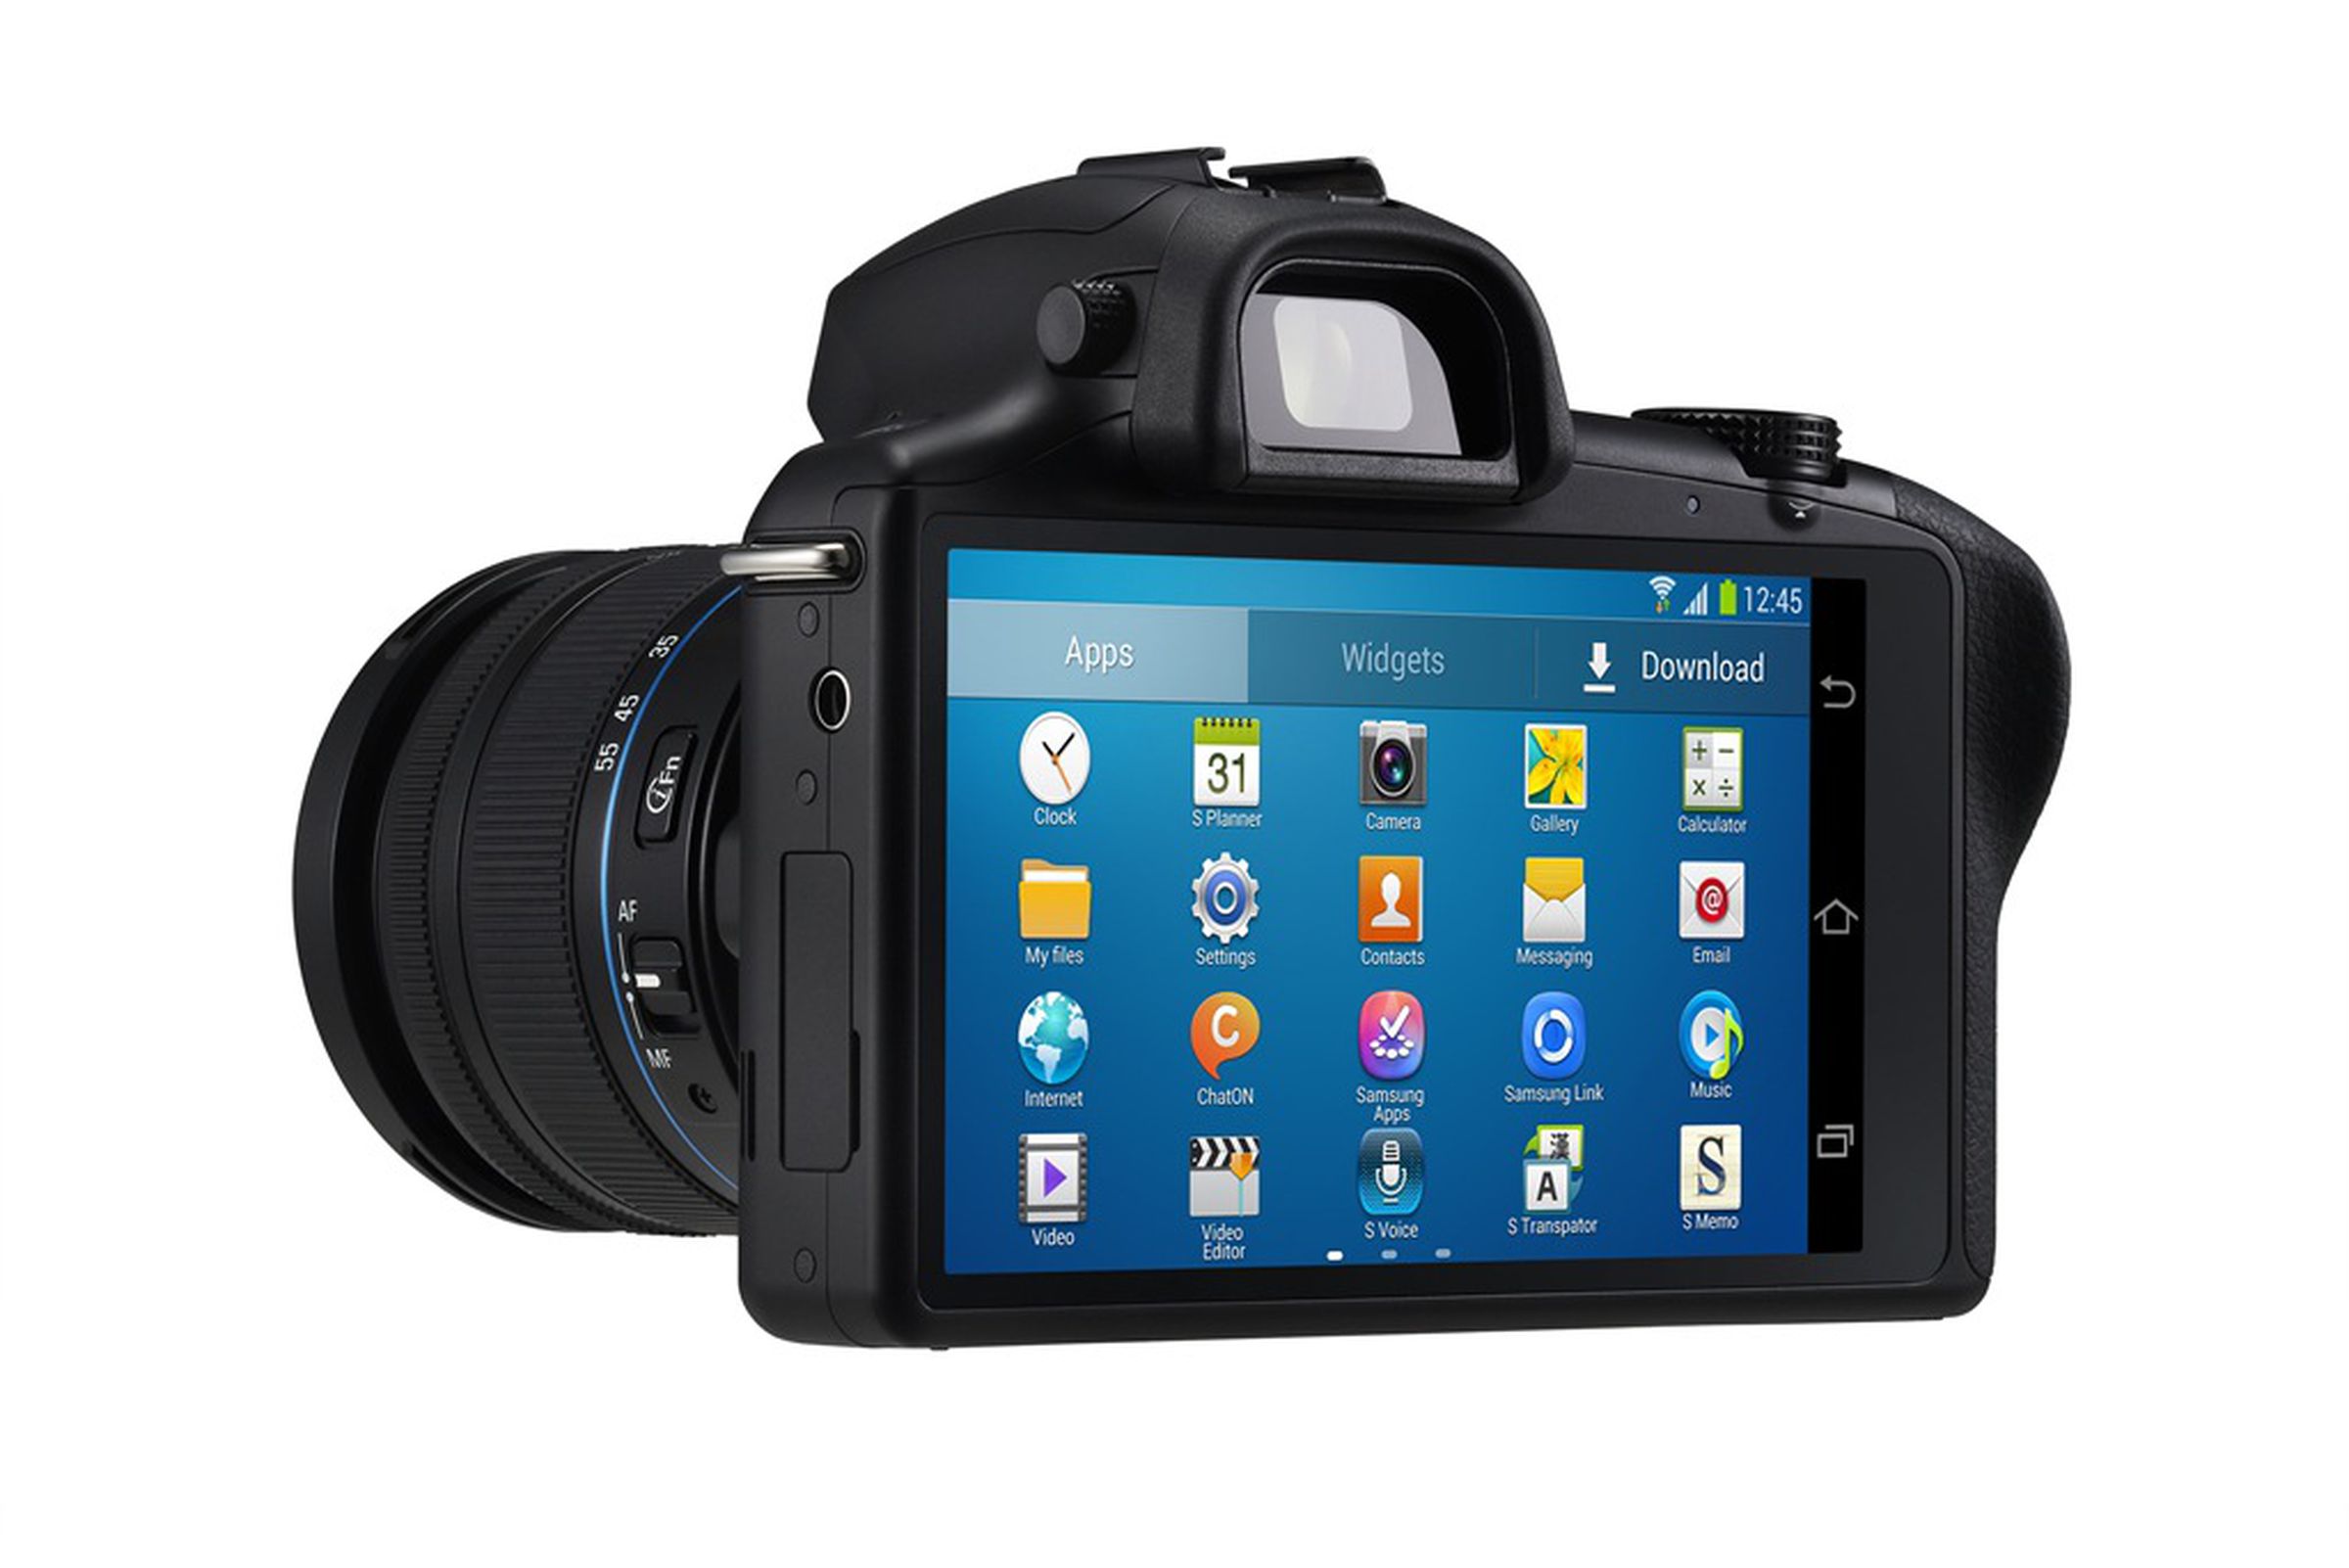 Samsung Galaxy NX pictures